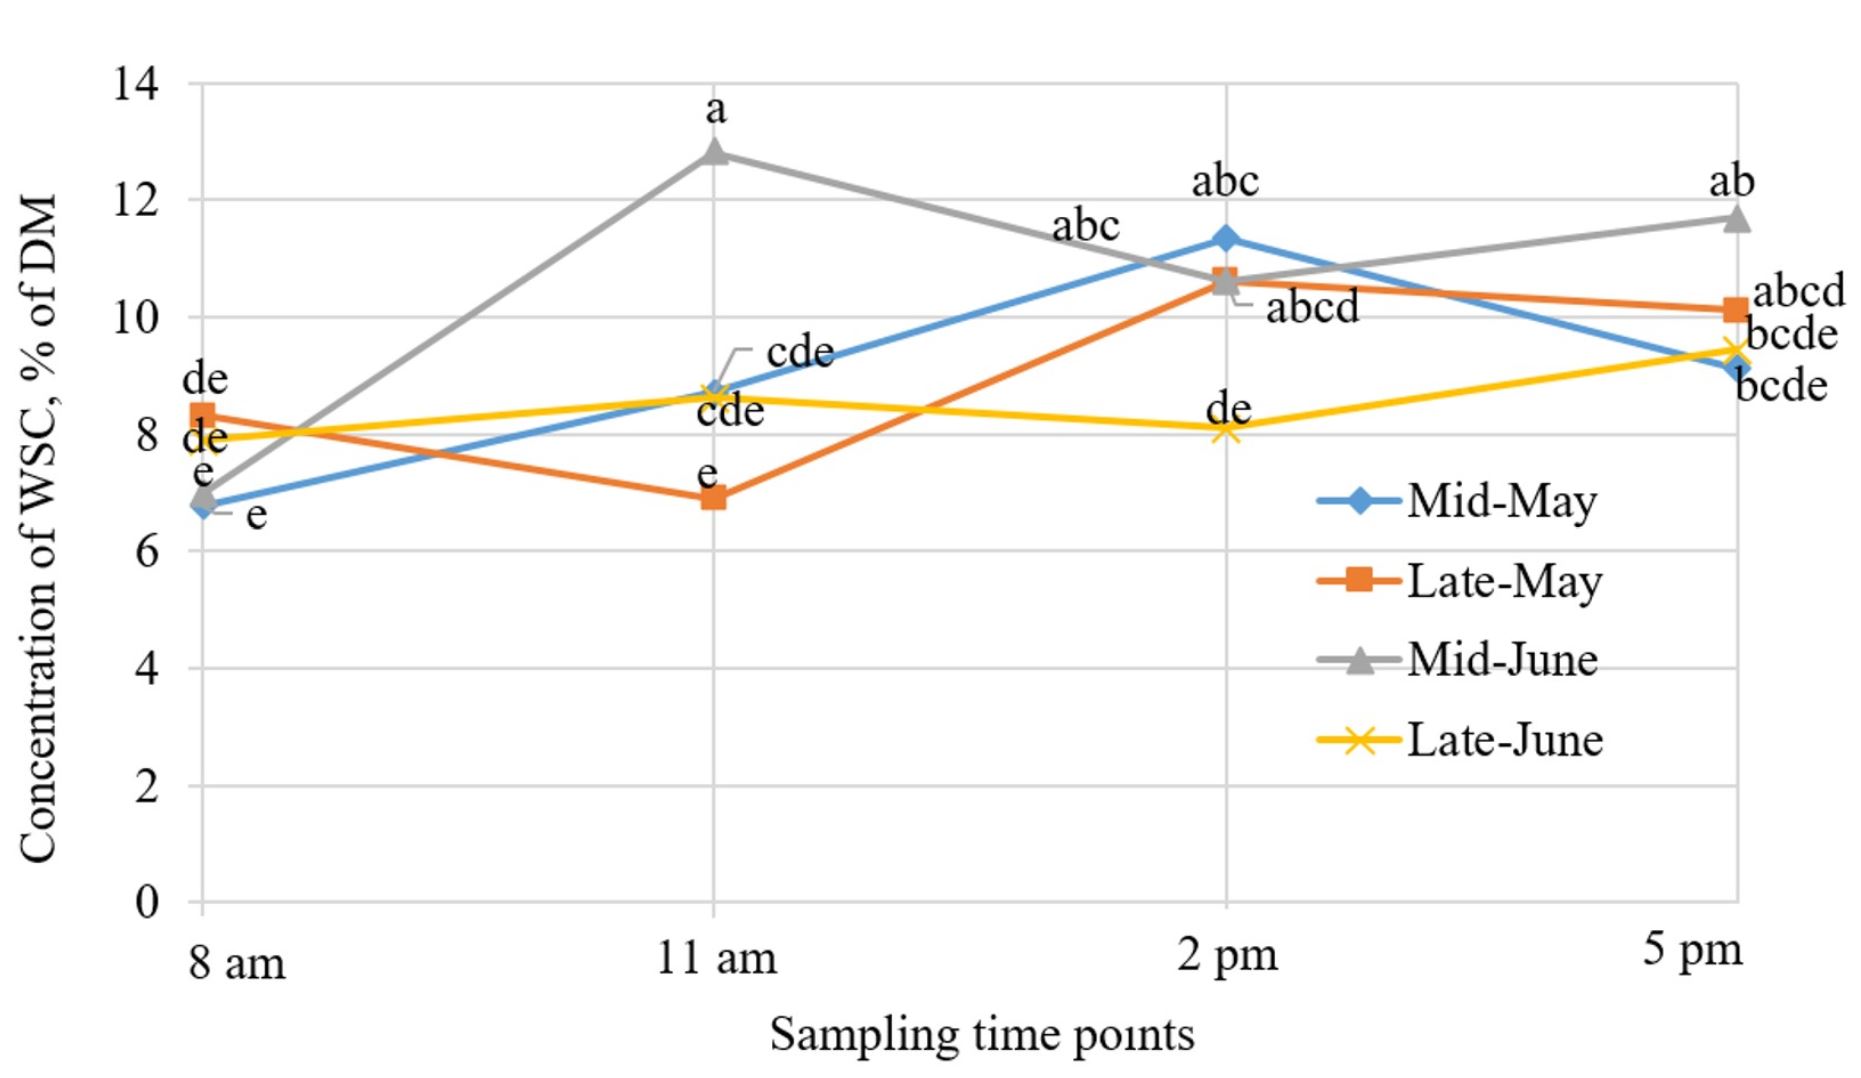 Figure 4. The concentration of water soluble carbohydrates (WSC) as a percent of dry matter (DM) for forages sampled at four different times of the day, 8 am, 11 am, 2 pm, and 5 pm, on four harvest dates during the grazing season, mid-May, late-May, mid-June, and late-June. Different letters indicate that means differ significantly (P<0.05).